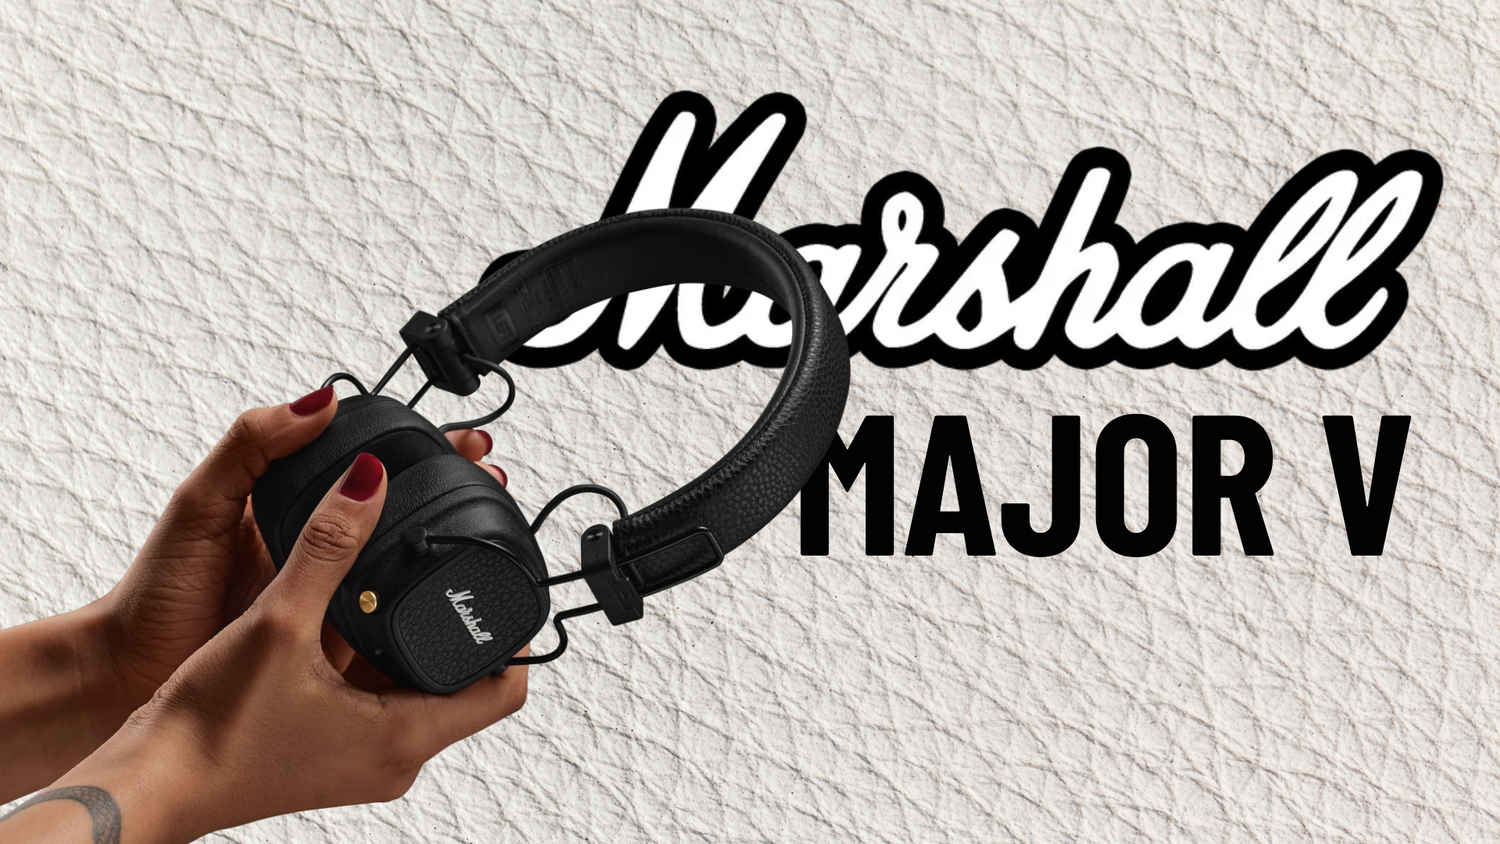 Marshall Major V headphones launched: Price, Specifications, and all you need to know